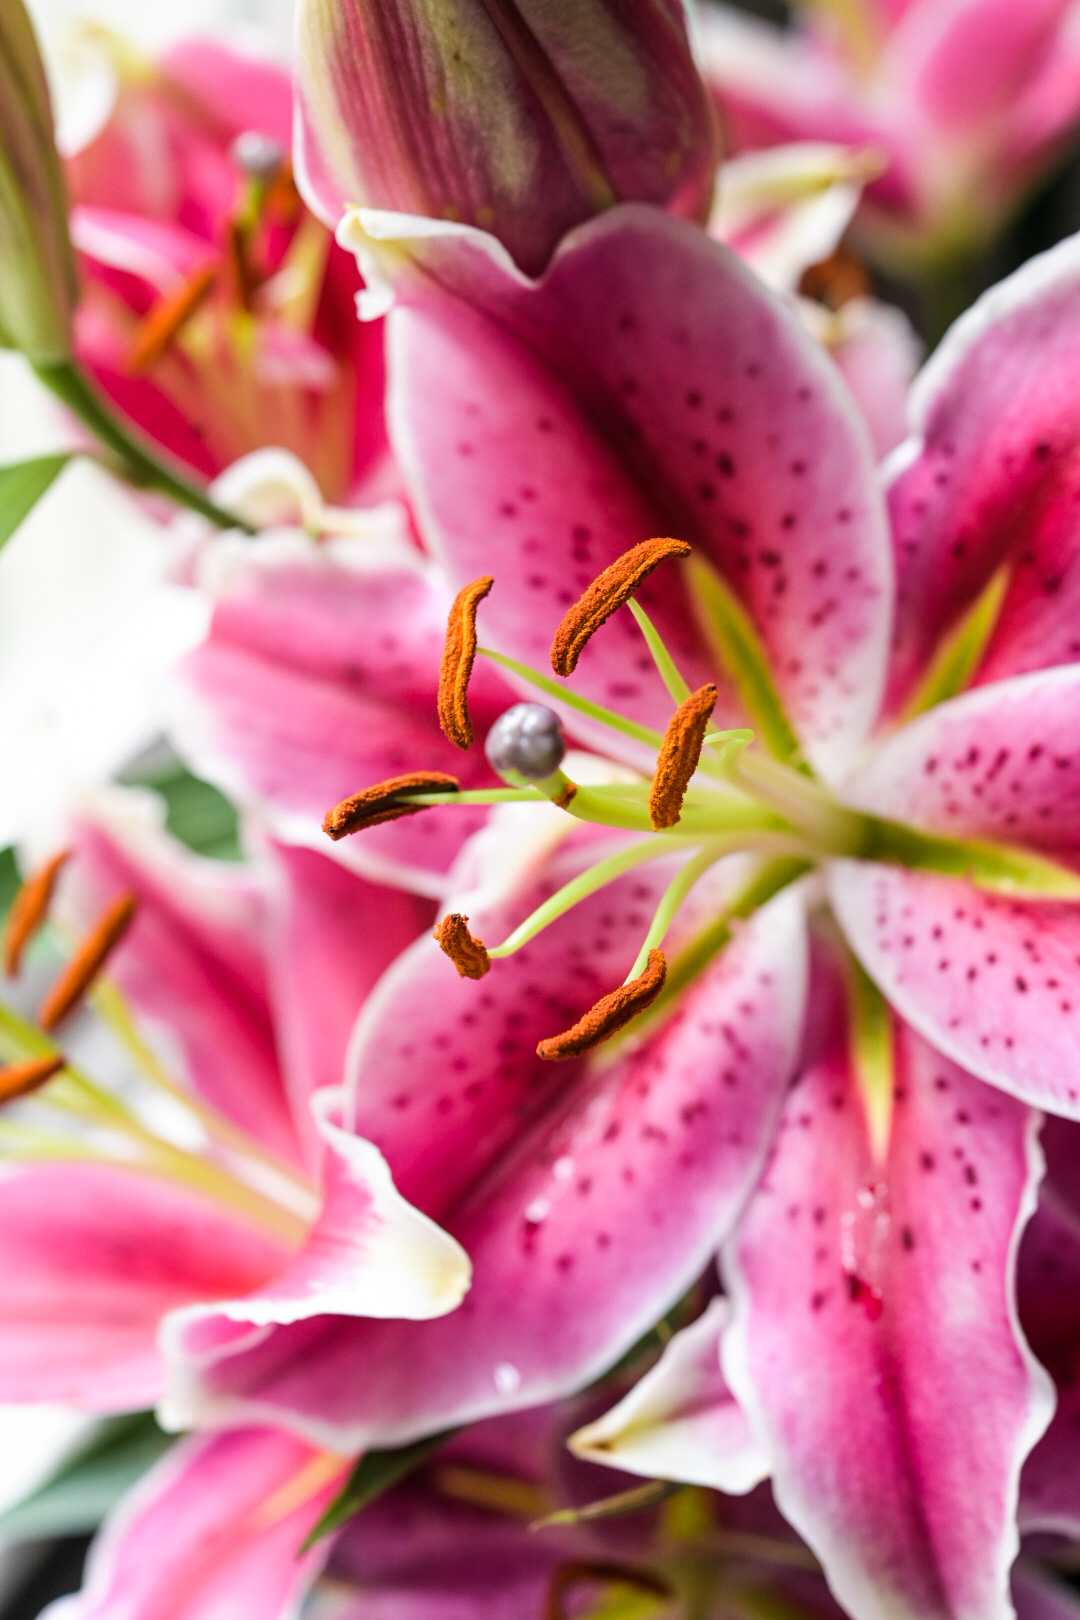 Details of the sappy pistil and stamen from a pink lily